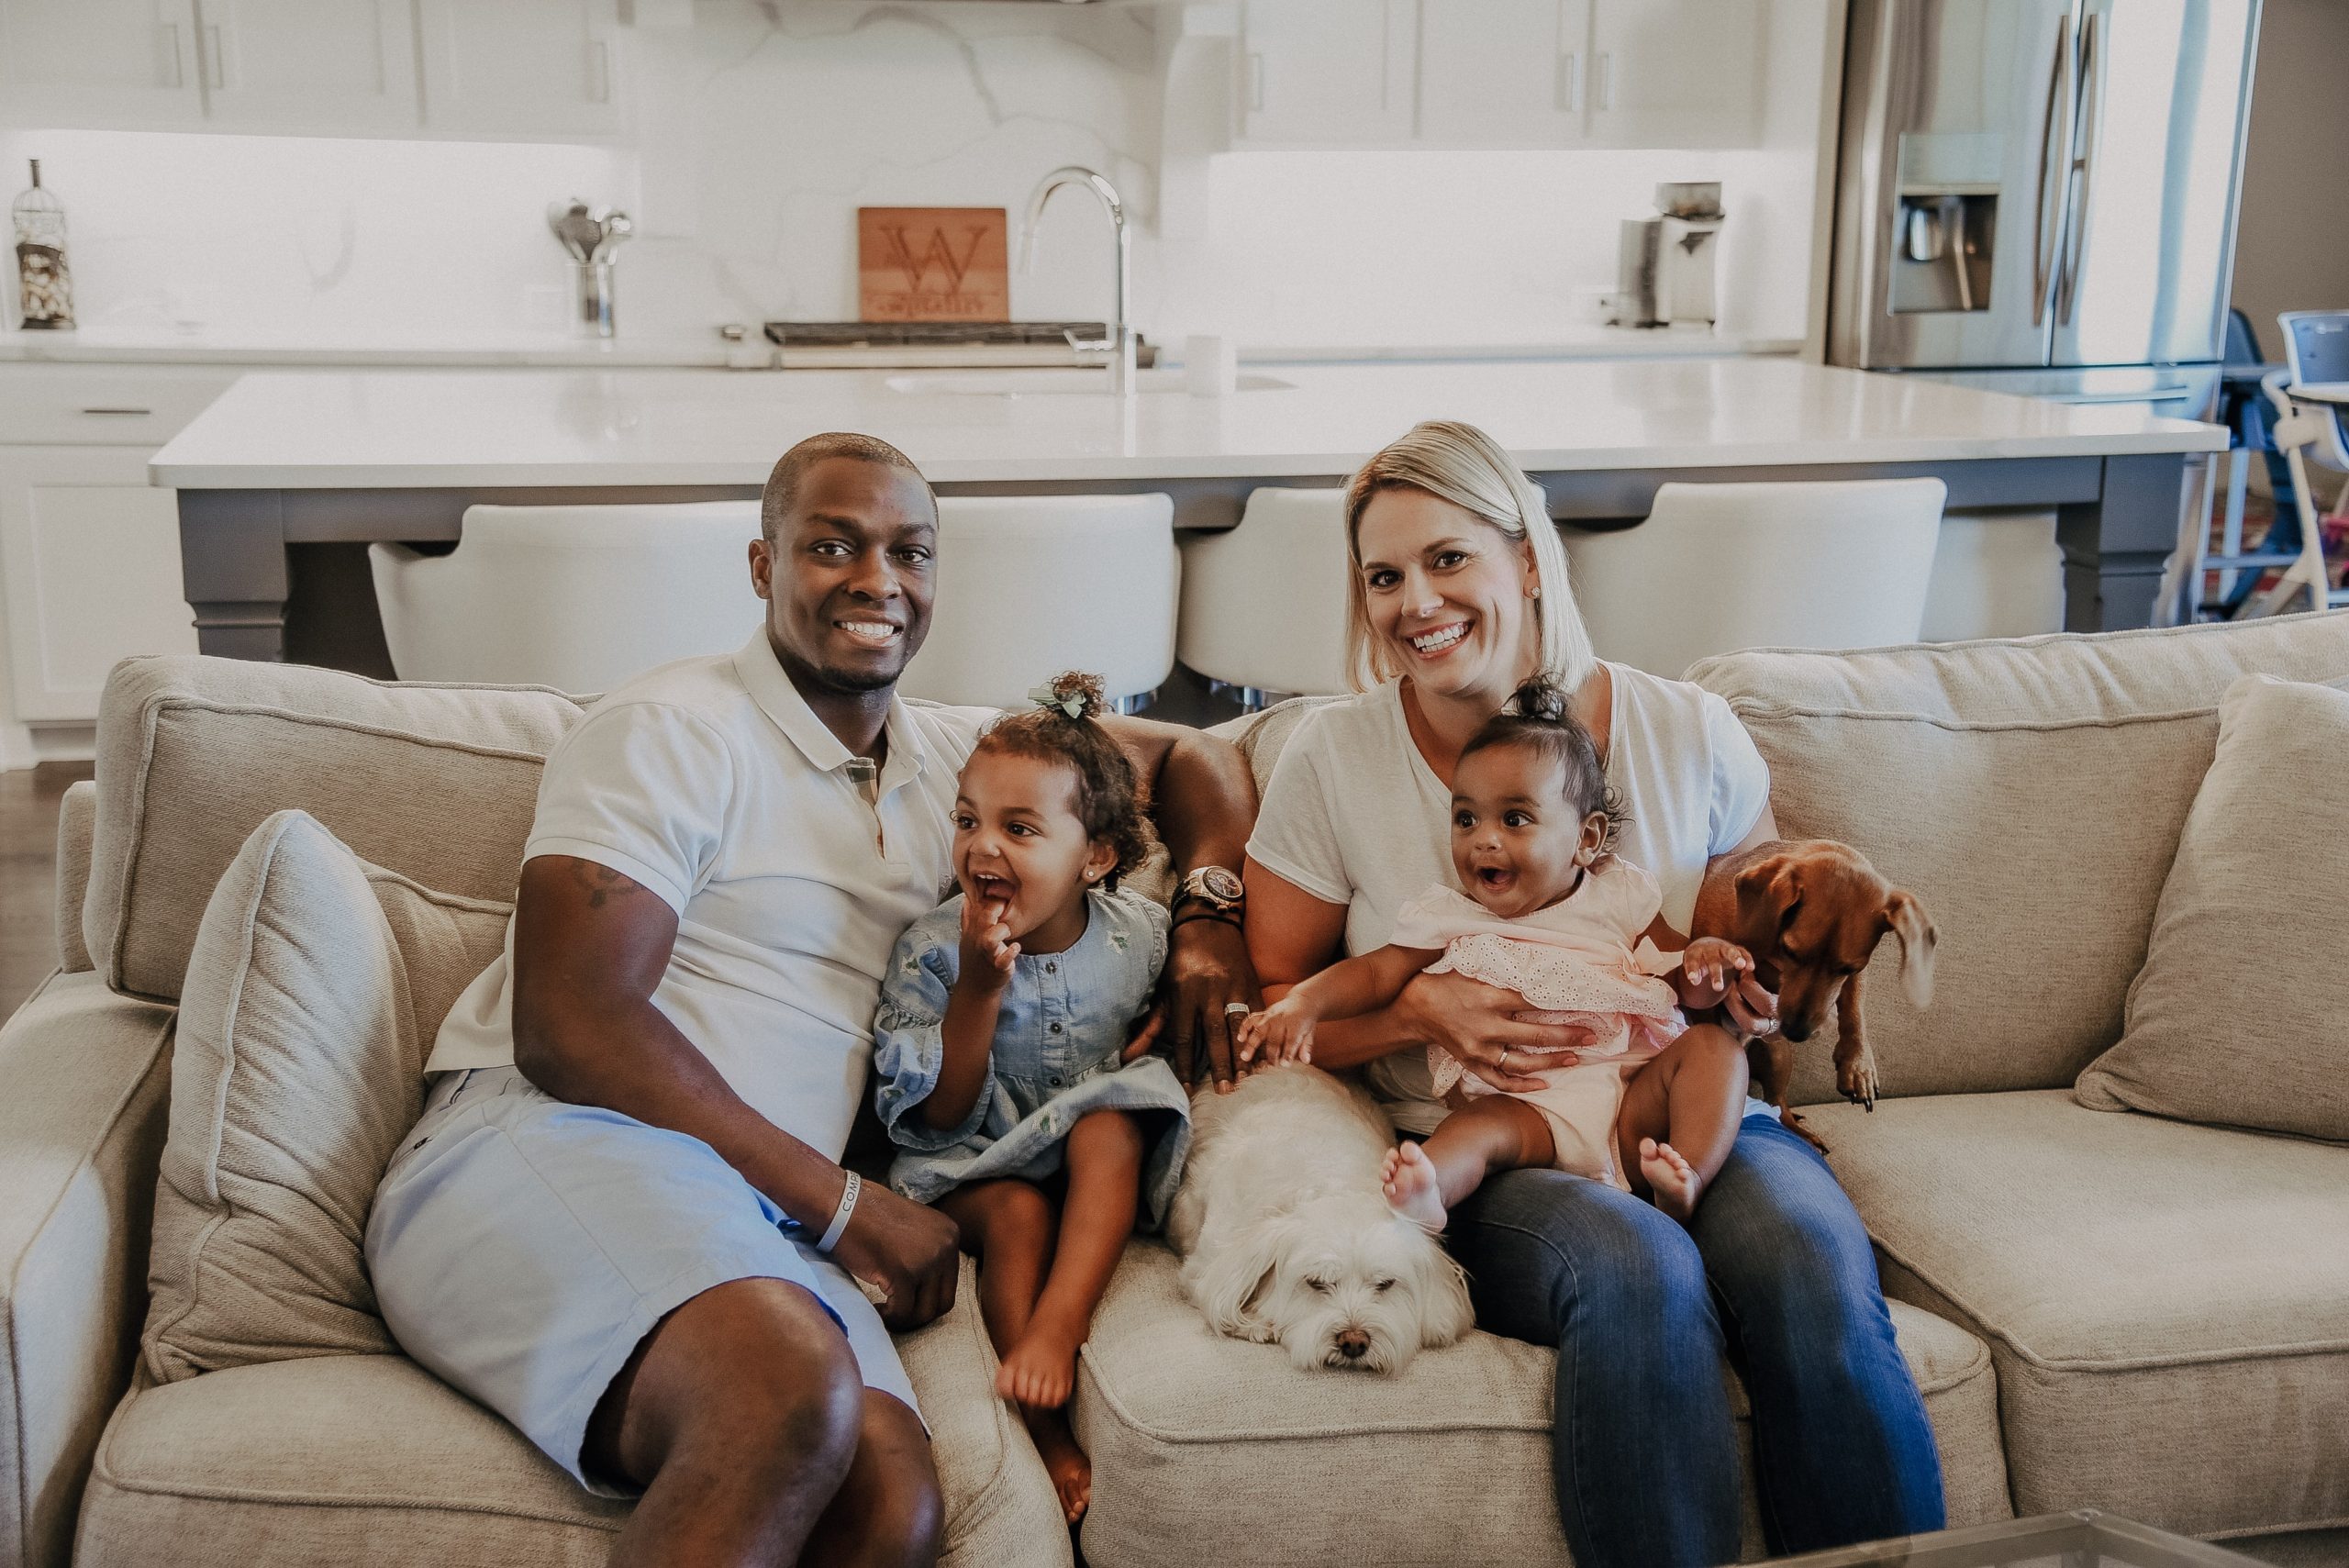 A photo of Terrence Wheatley sitting on the couch with his wife and children.